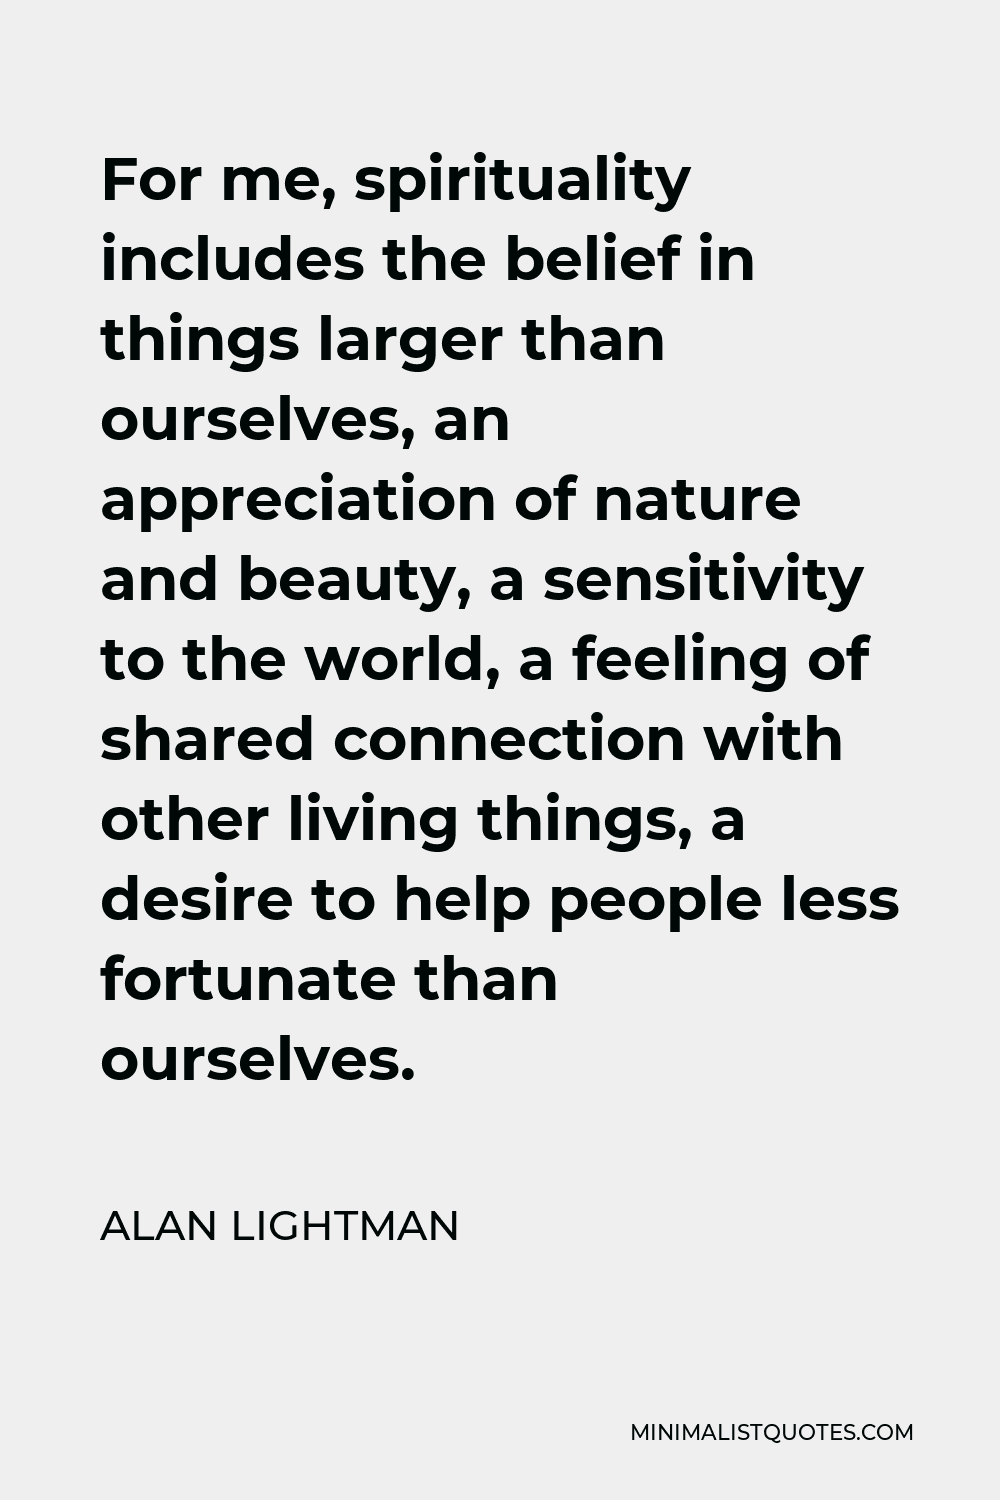 Alan Lightman Quote - For me, spirituality includes the belief in things larger than ourselves, an appreciation of nature and beauty, a sensitivity to the world, a feeling of shared connection with other living things, a desire to help people less fortunate than ourselves.